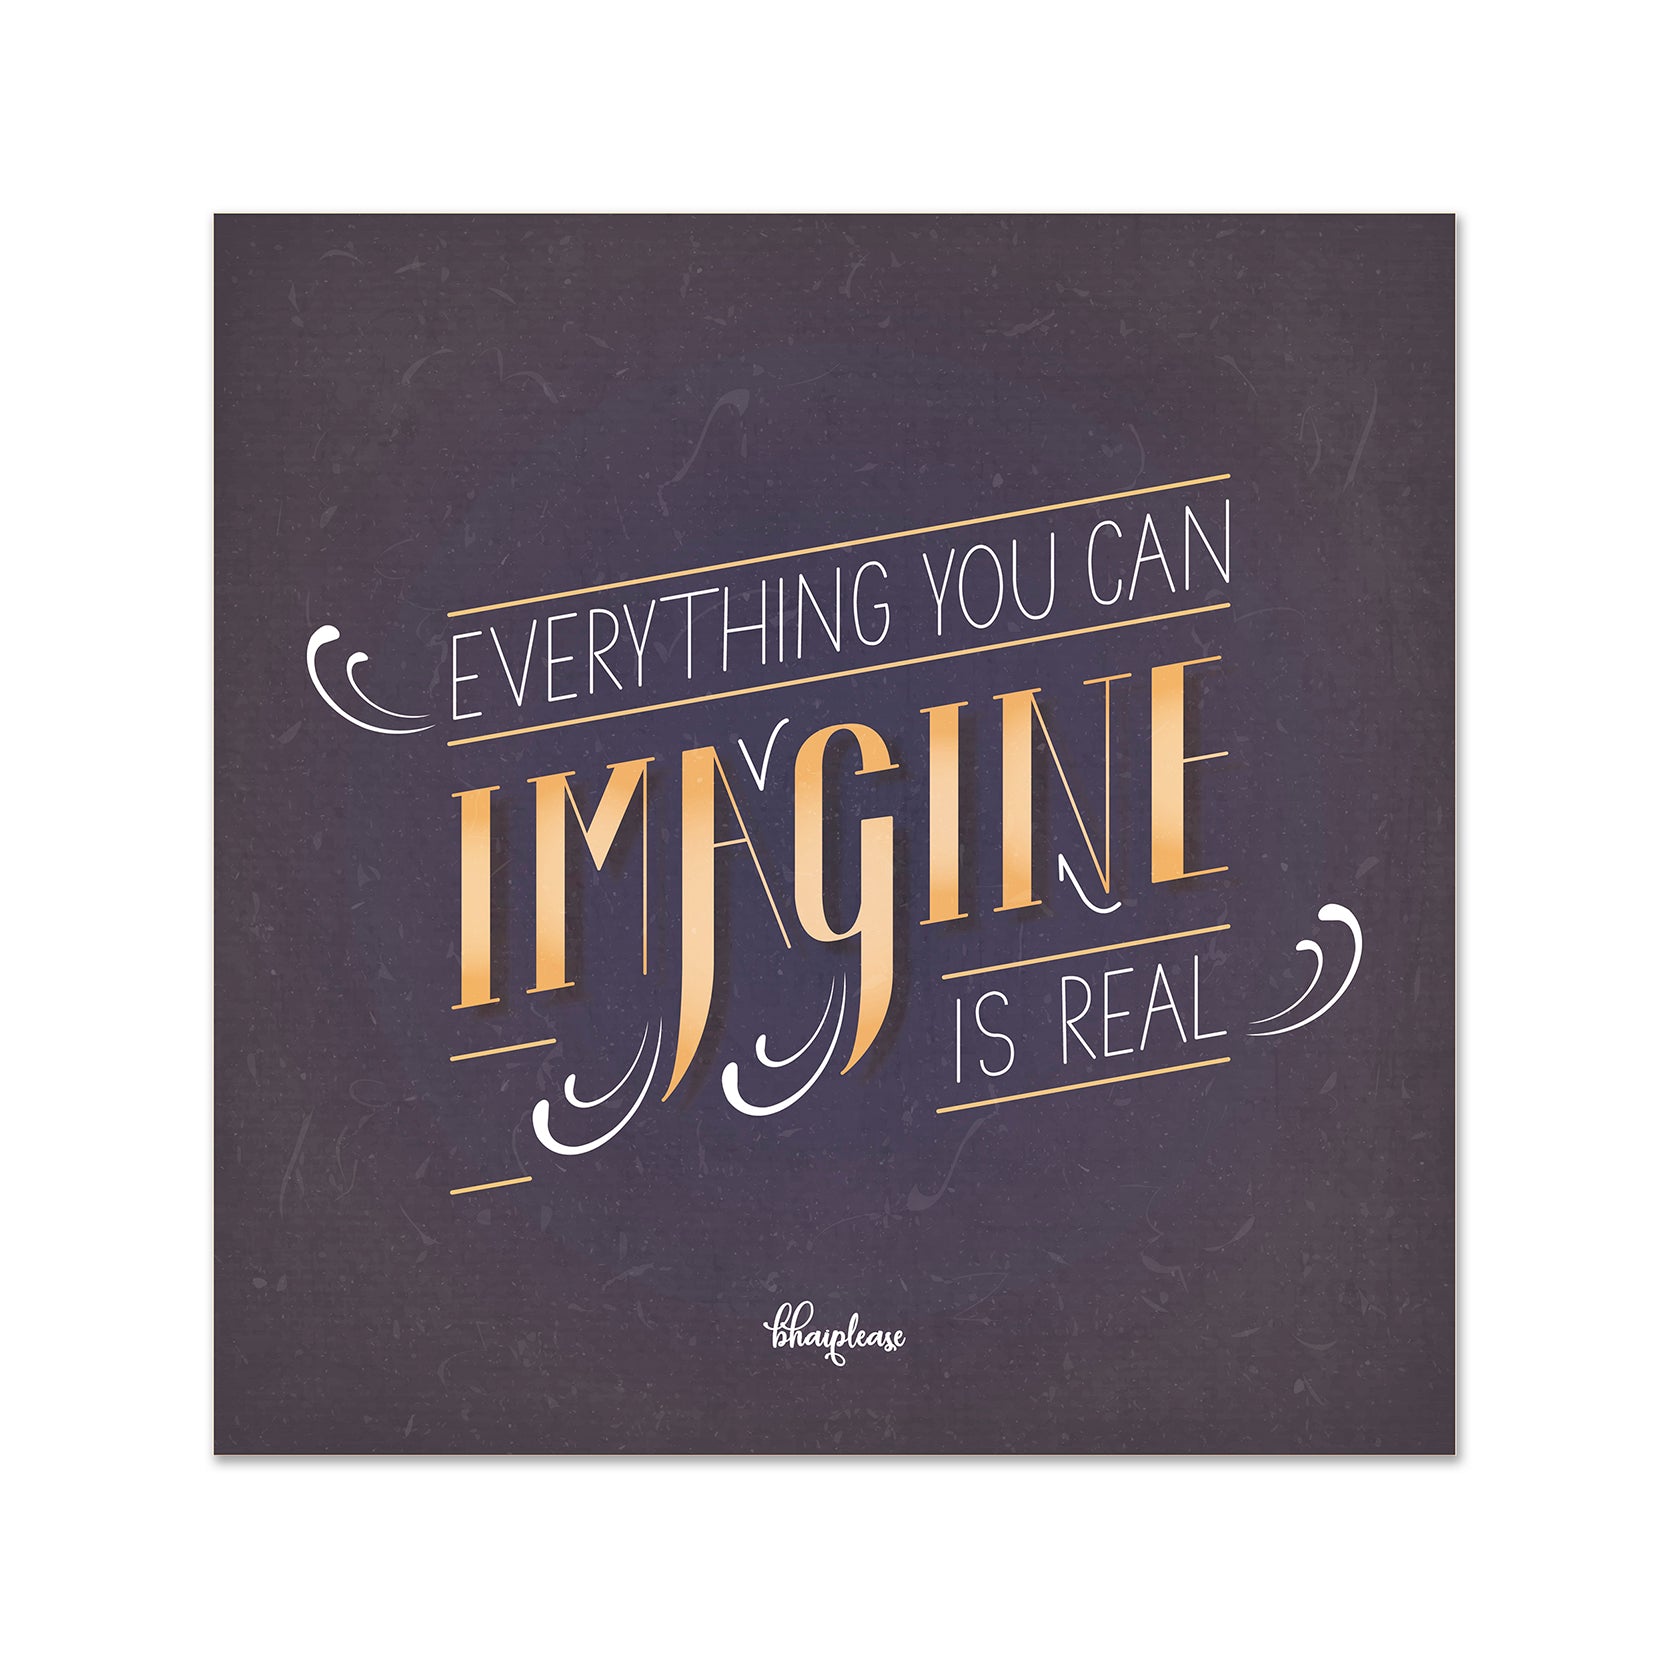 Everything You can Imagine is Real Wooden Fridge / Refrigerator Magnet